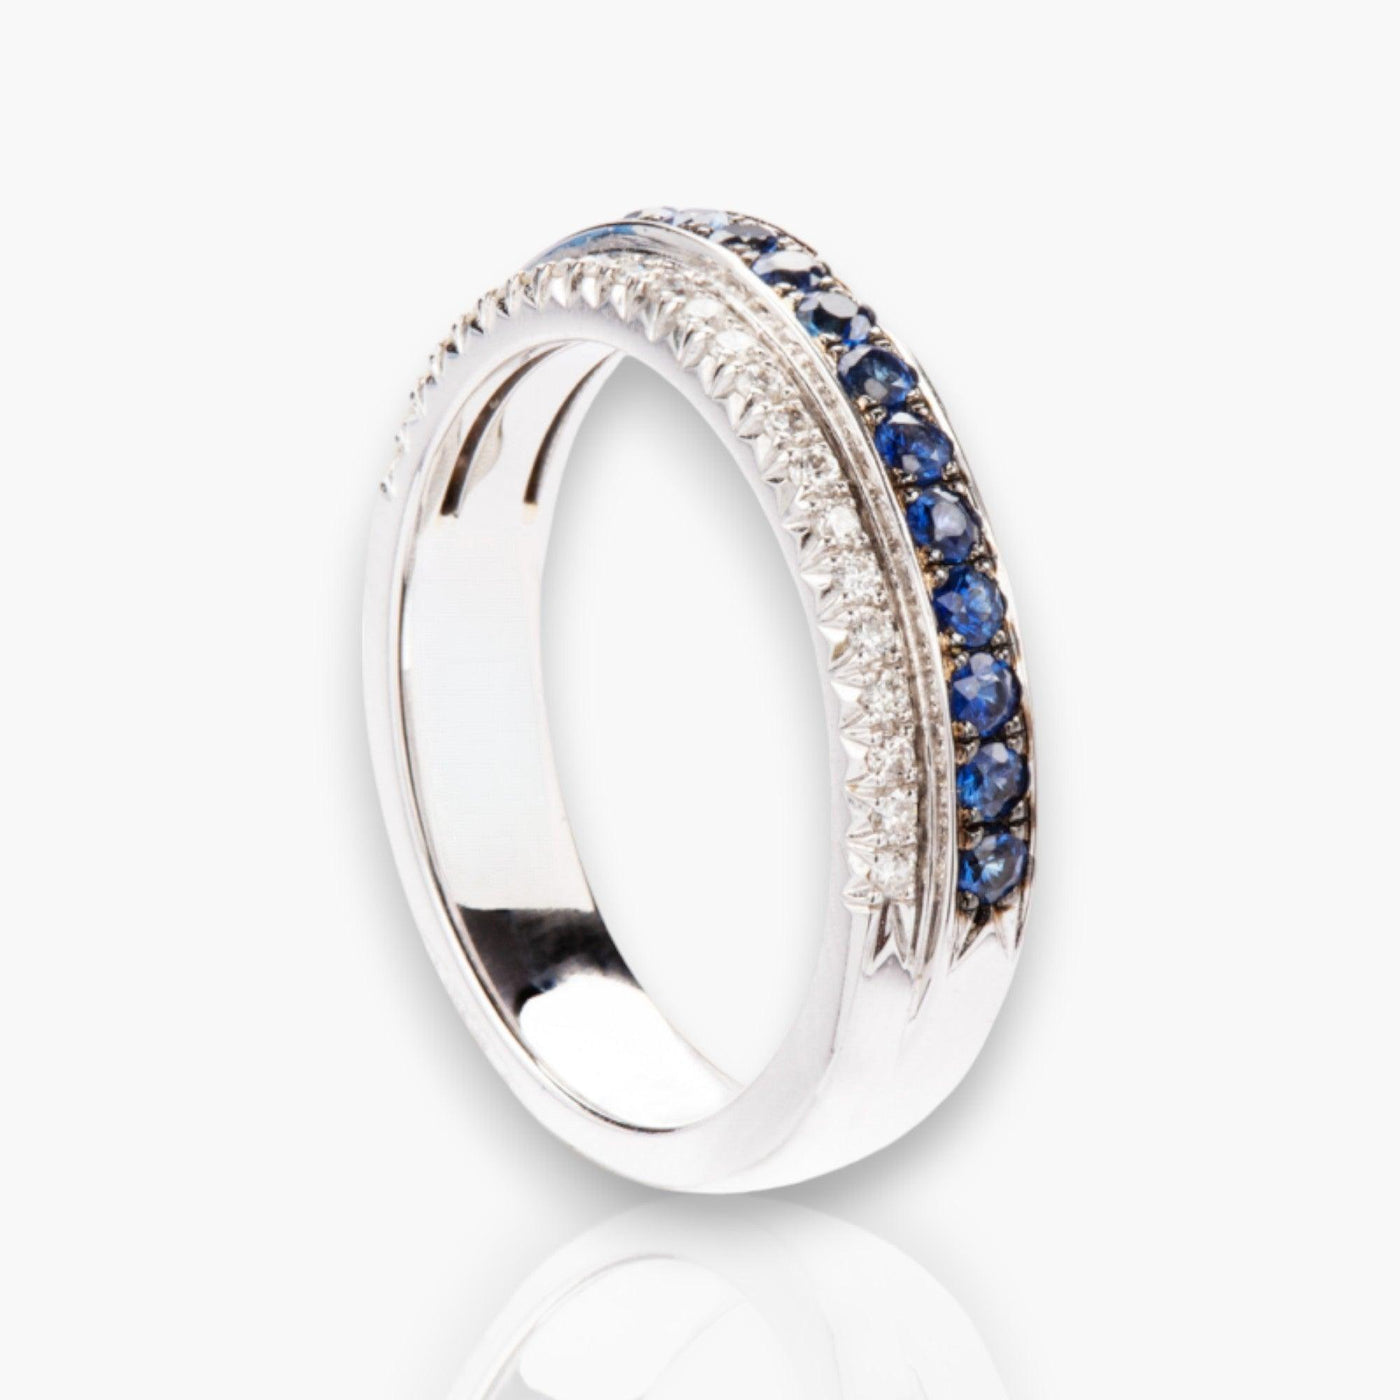 Anniversary Ring with Diamonds and Sapphires - Moregola Fine Jewelry